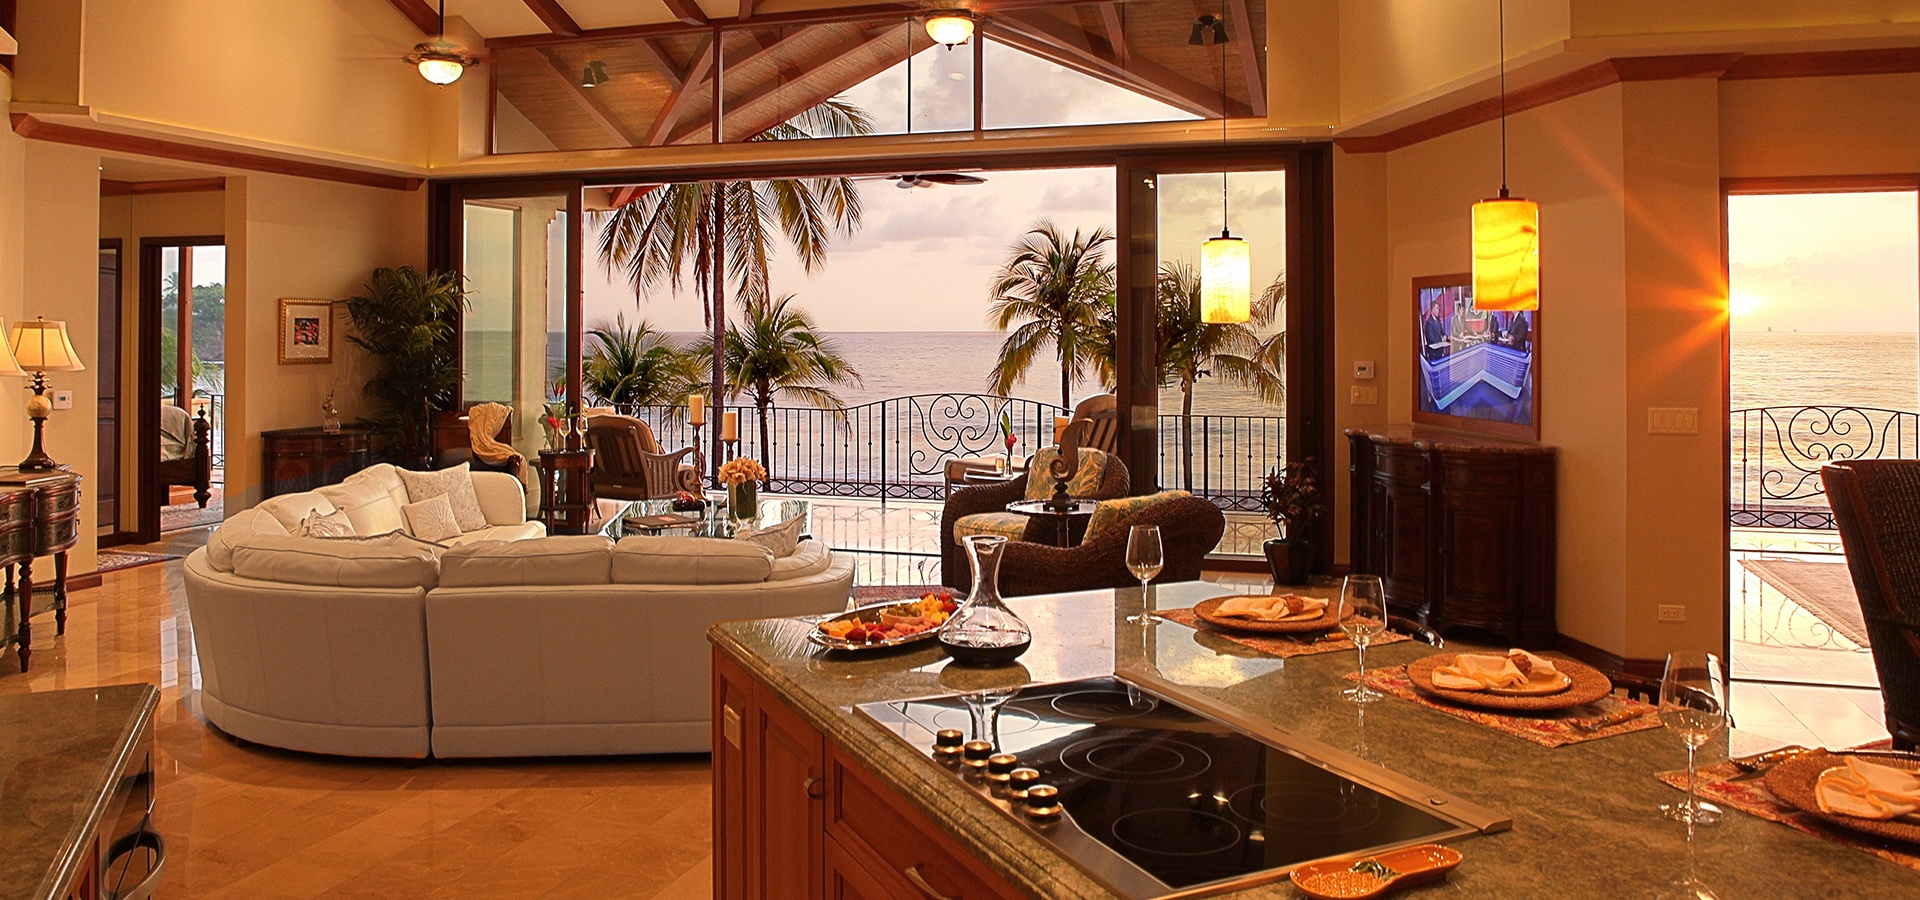 Palms Villas Costa Rica with three sumptuously furnished bedrooms, 3 Bedroom Villa